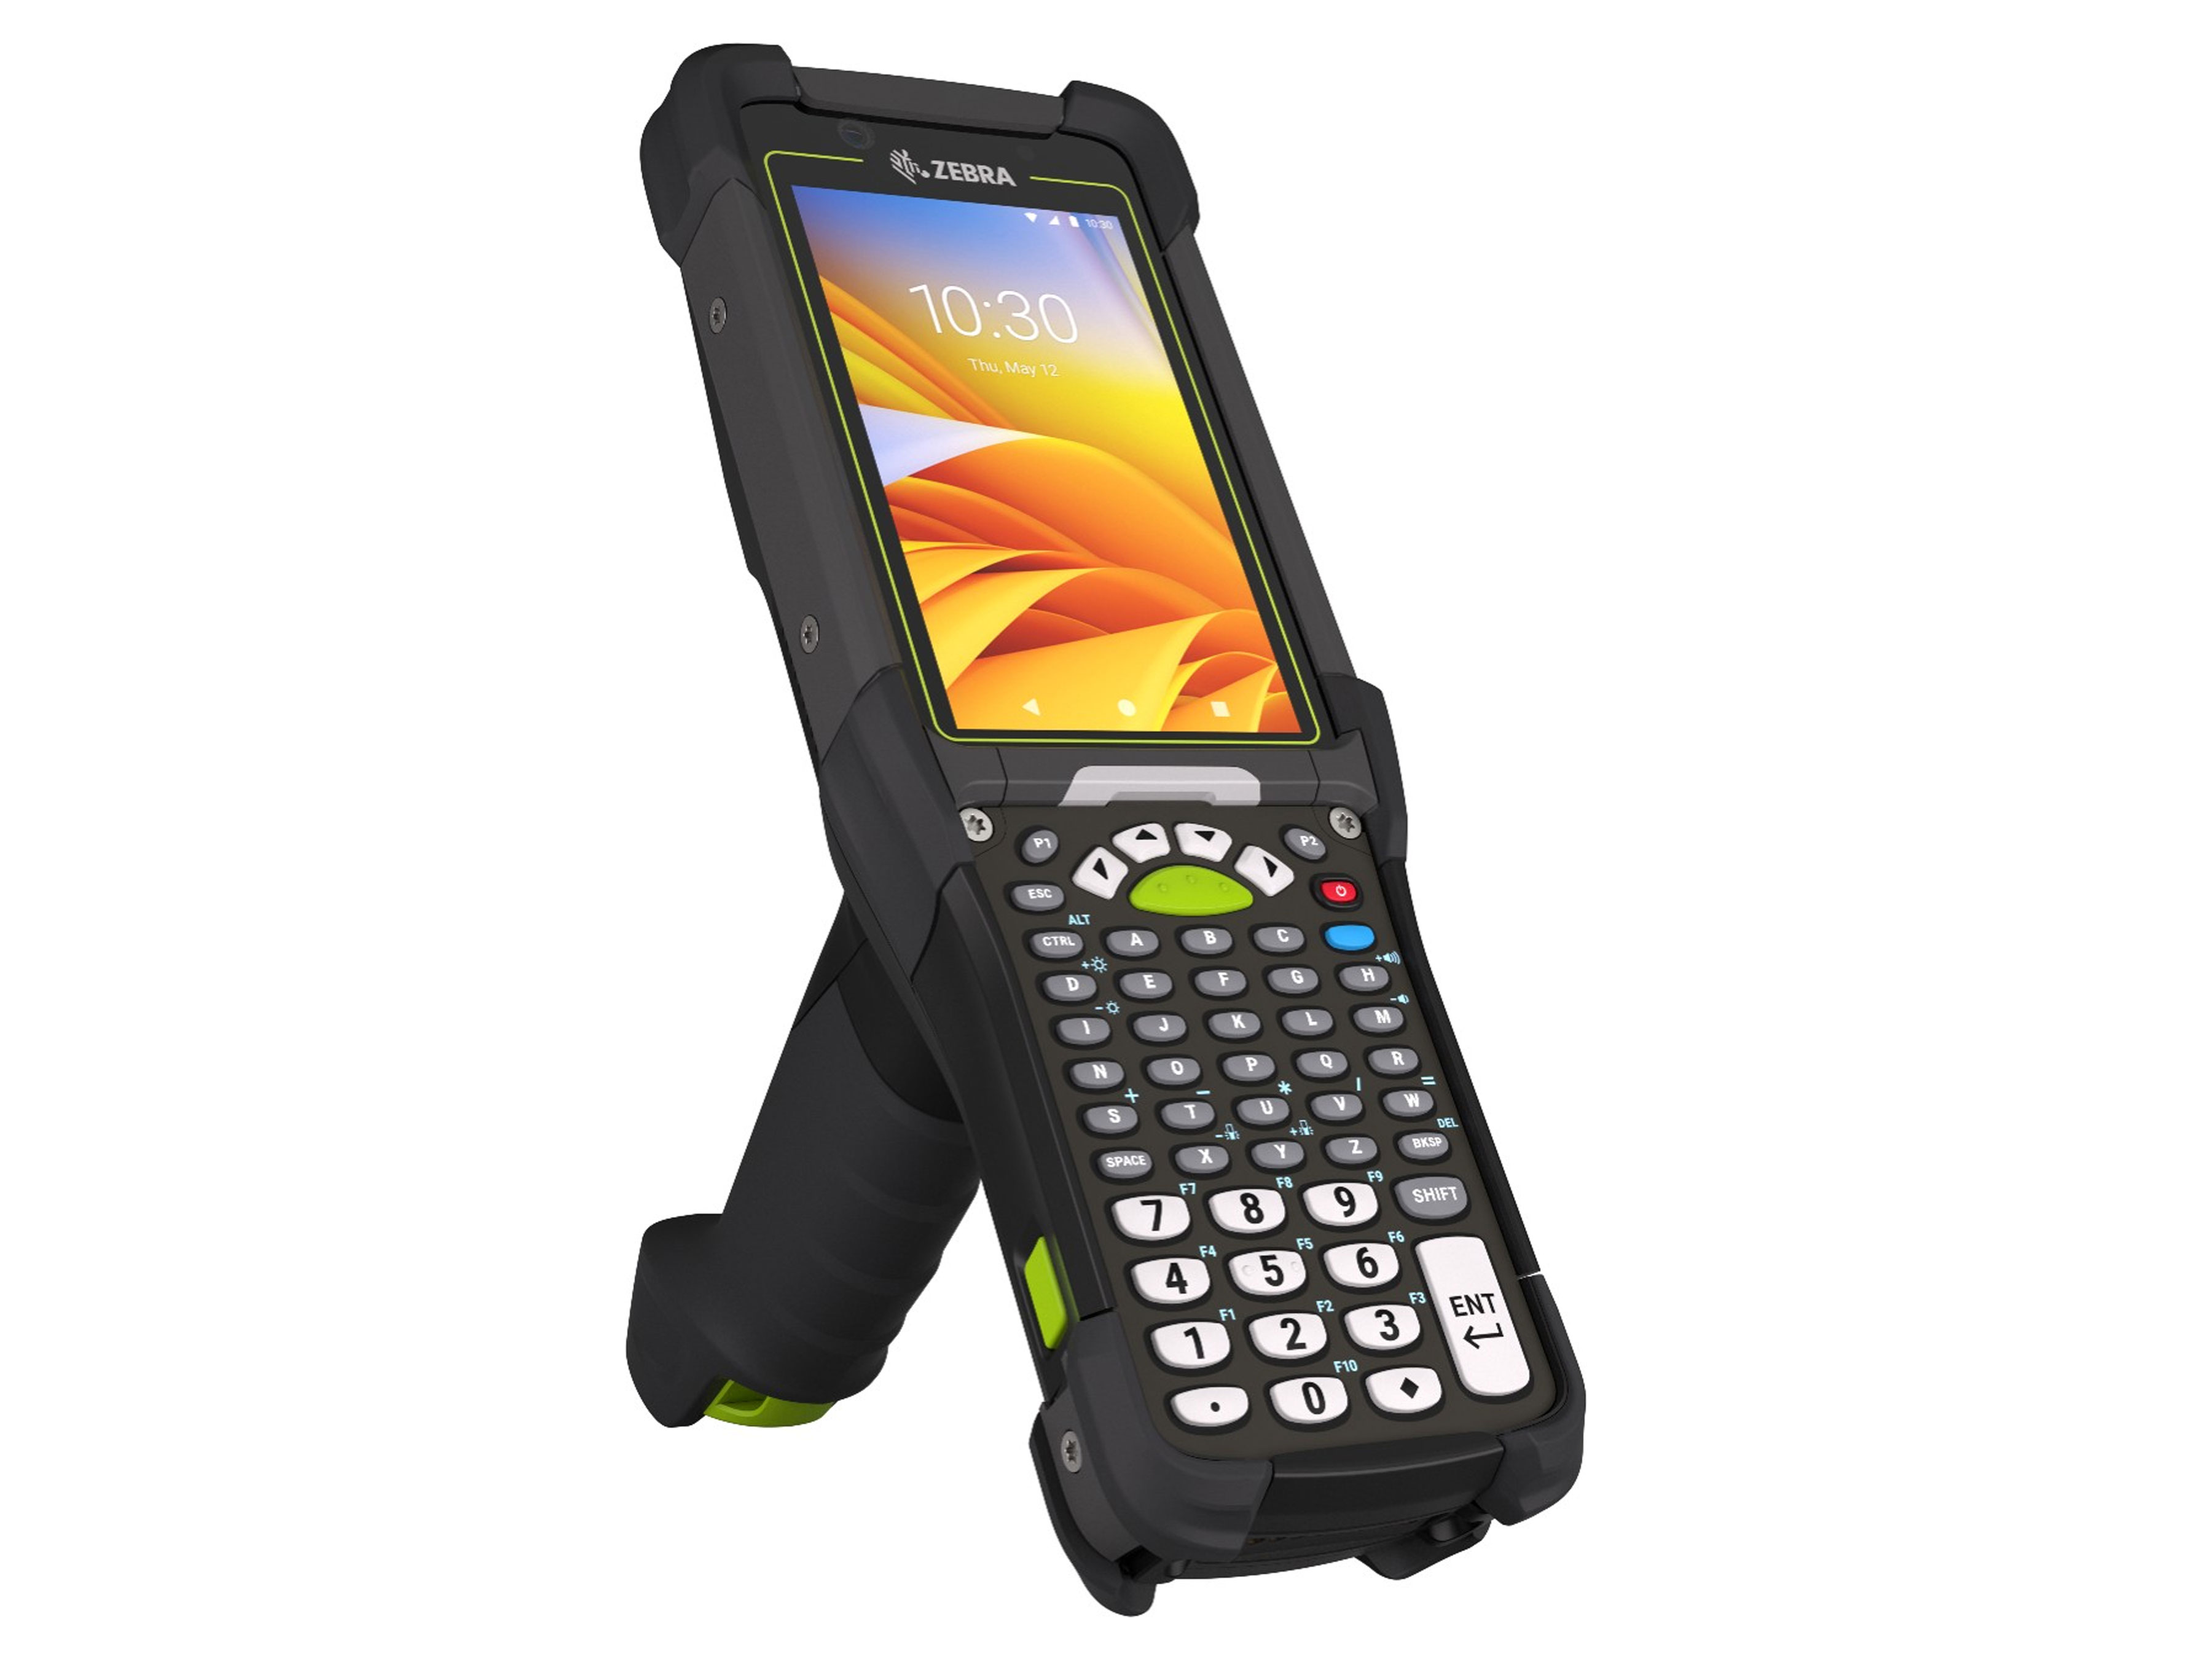 Zebra's new ultra-rugged mobile computers, the MC9400 Series